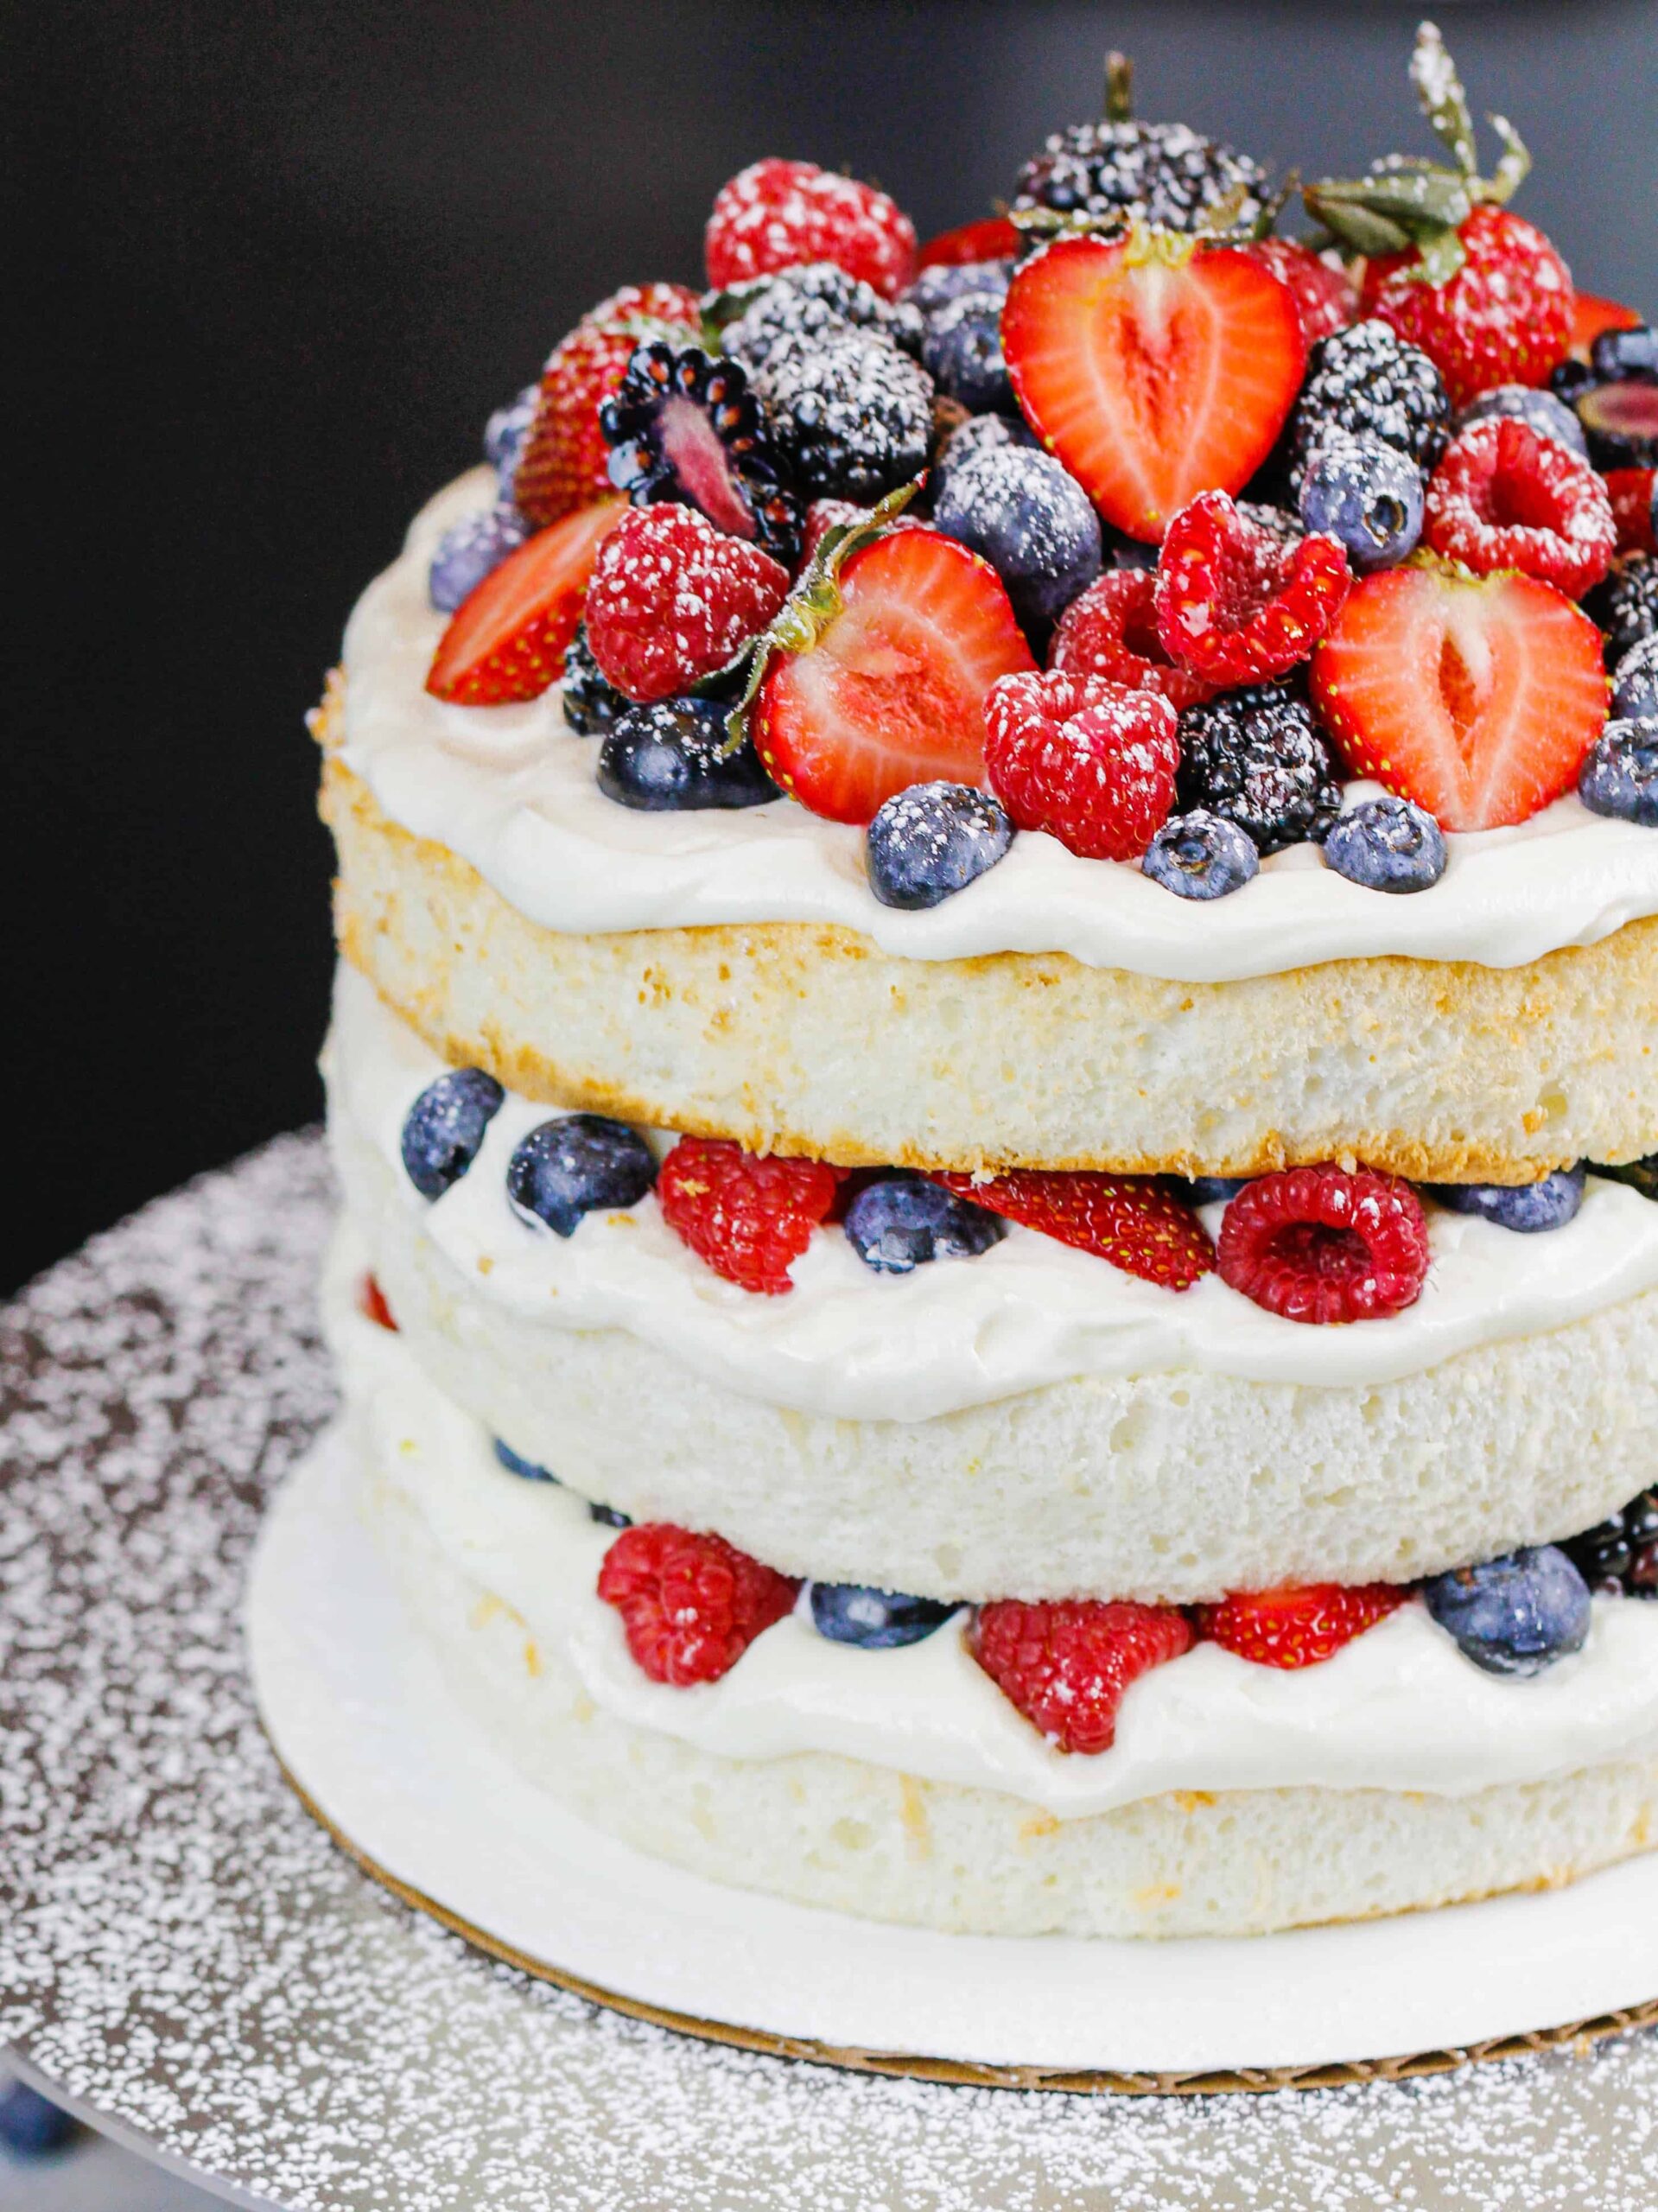 image of a layered angel food cake decorated with fresh berries and dusted with powdered sugar